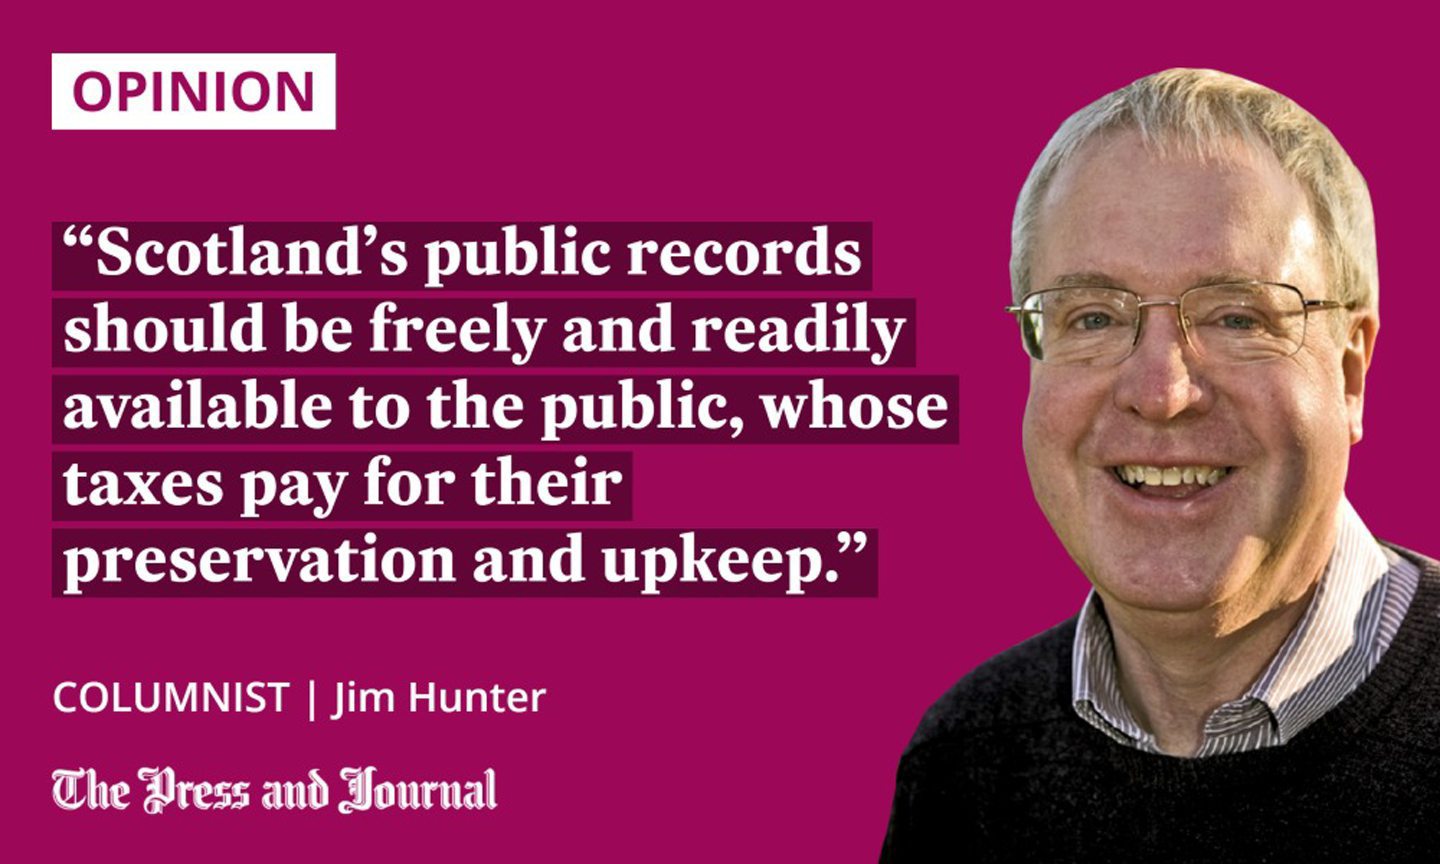 Columnist, Jim Hunter speaks about public records: "Scotland's public records should be freely and readily available to the public, whose taxes pay for their preservation and upkeep."